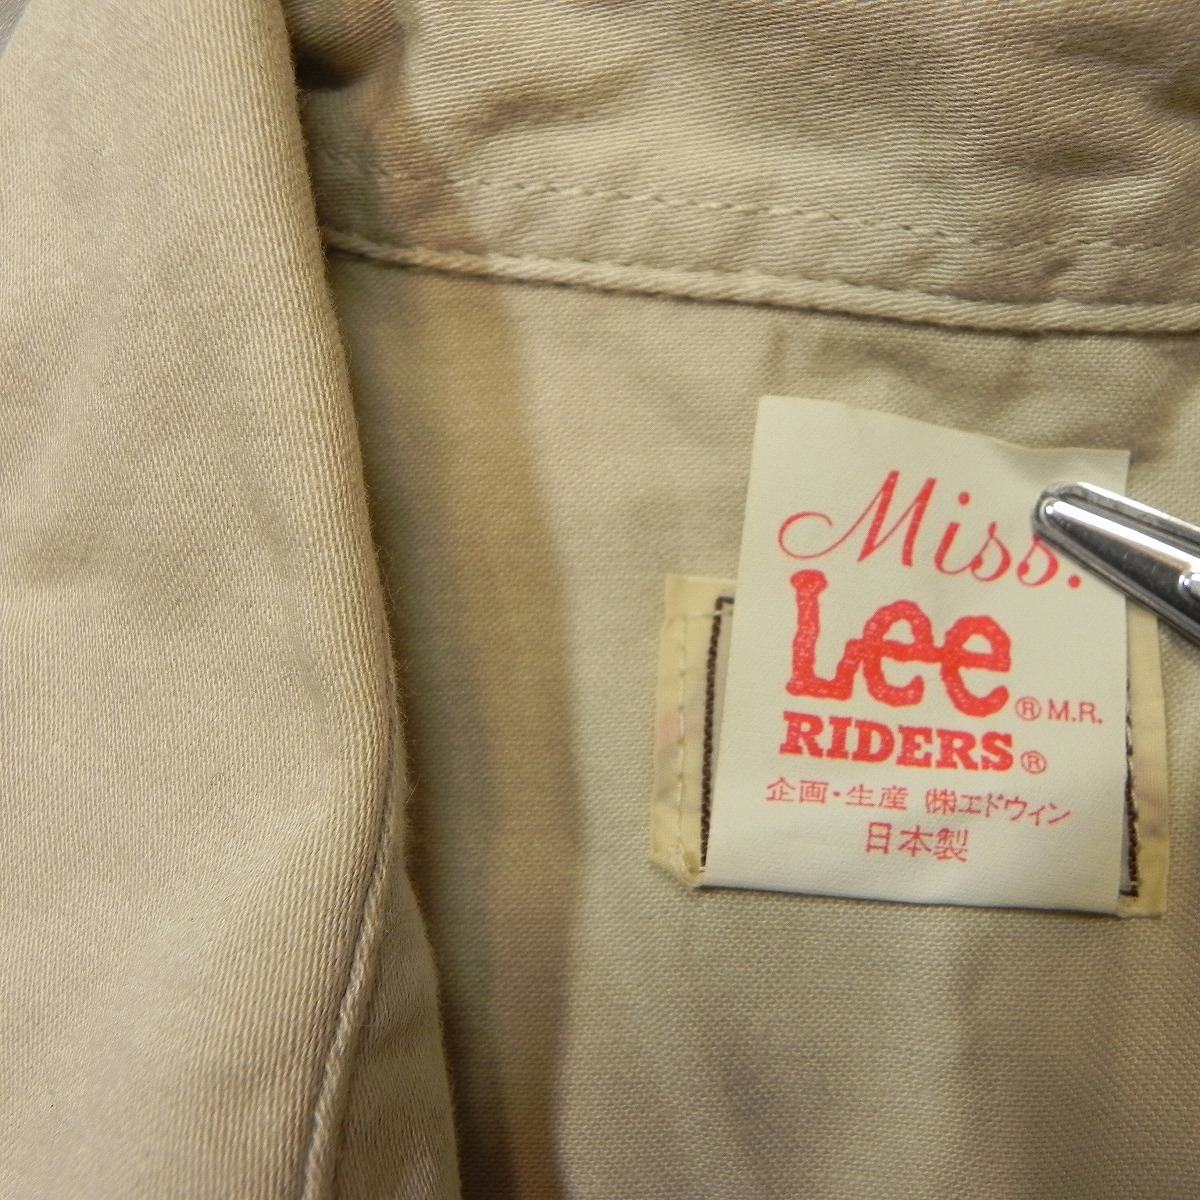 90s made in Japan Miss Lee 7450 * waste turner western shirt M * lady's old clothes eggshell white series *c